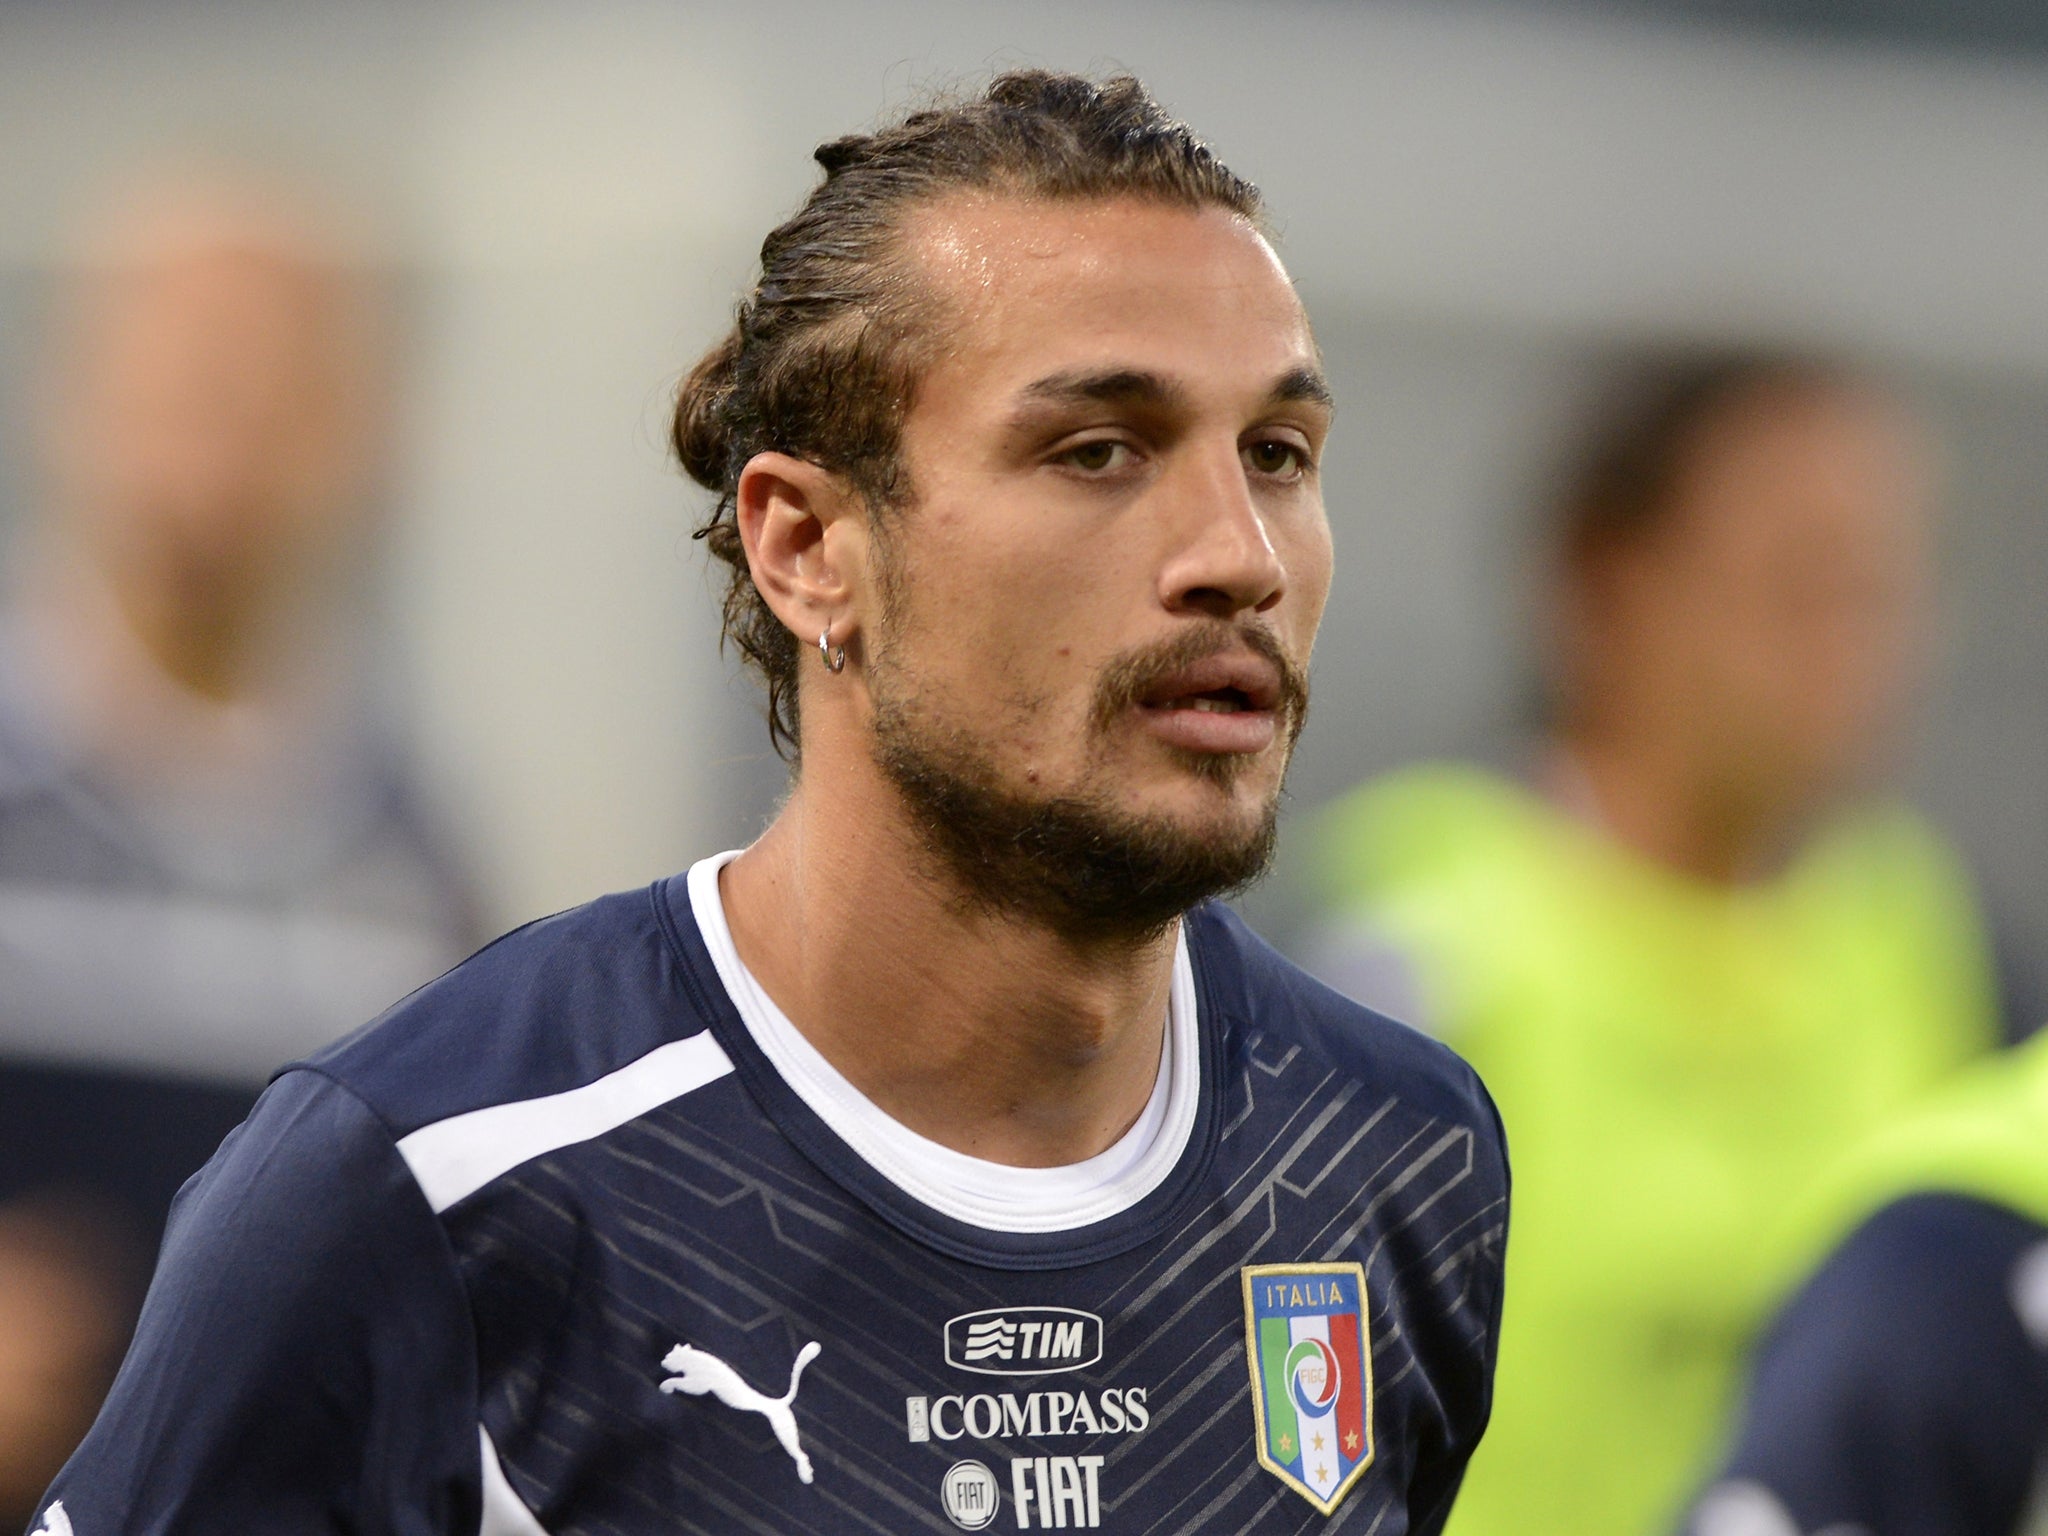 Dani Osvaldo is expected to feature for Southampton